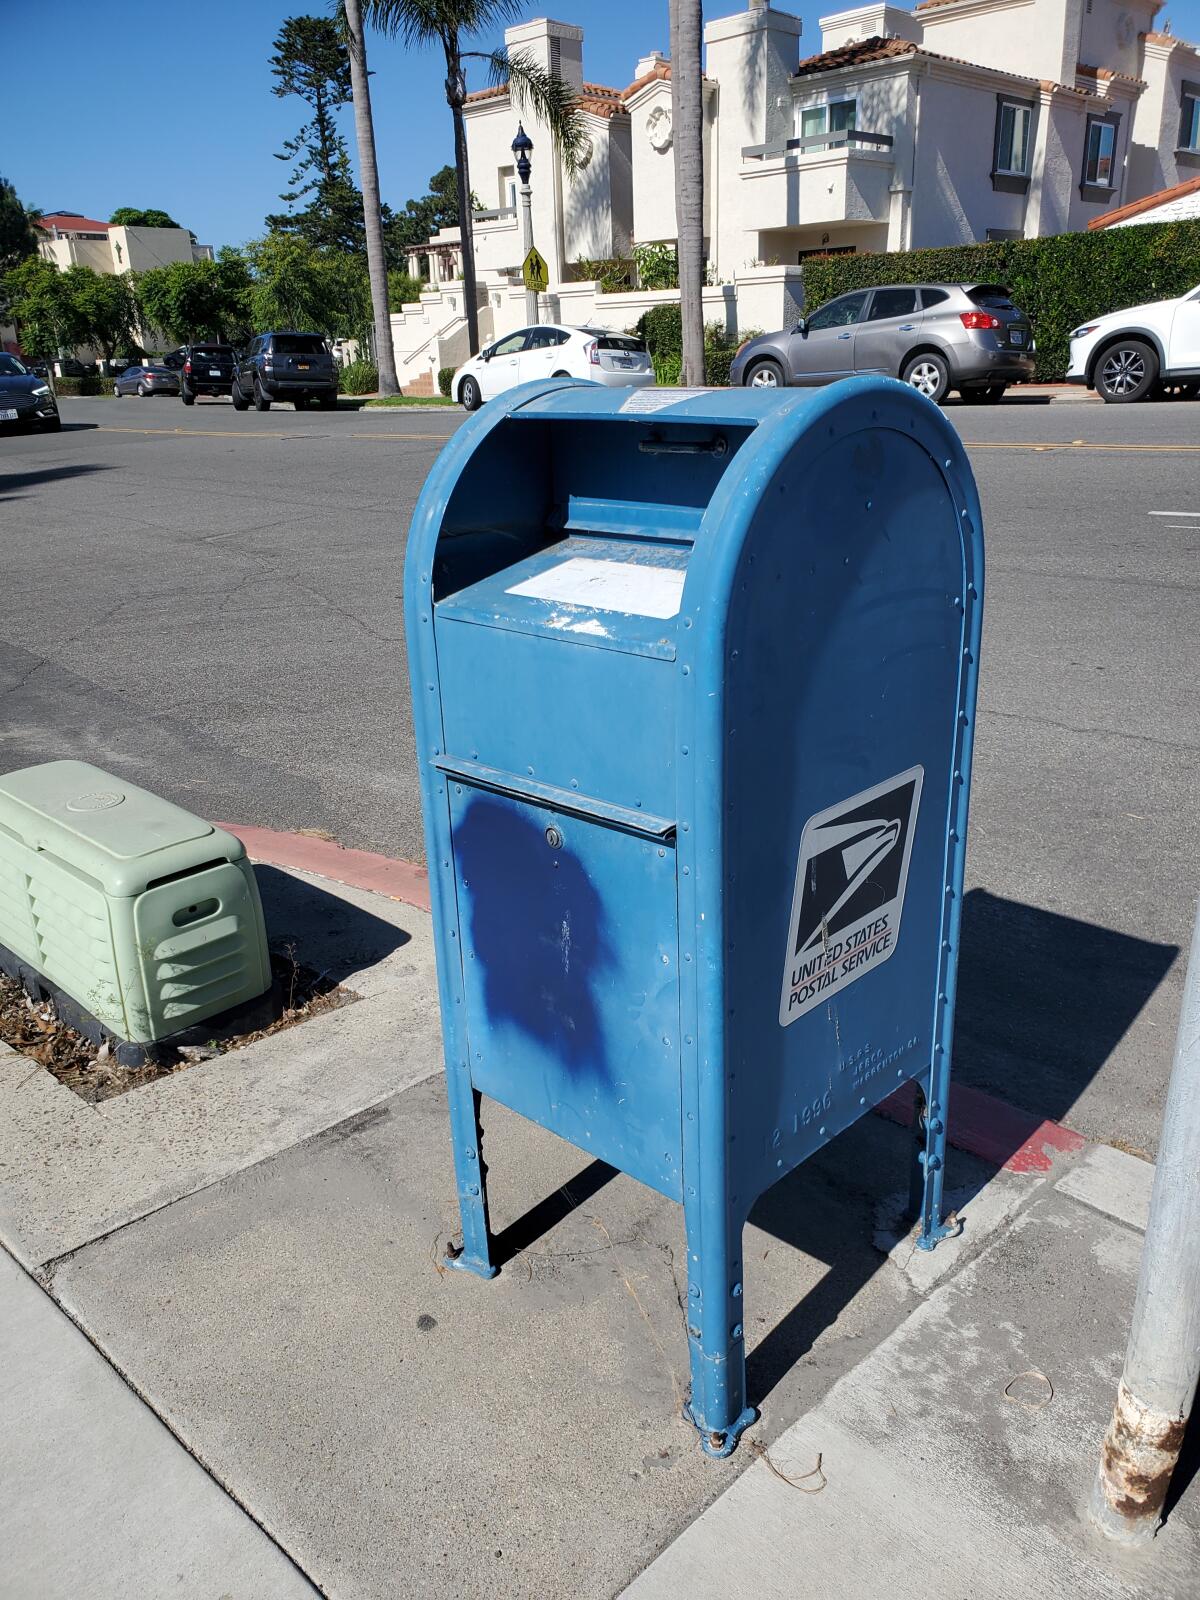 A sticky substance was found on the inside of the lid of this mailbox in La Jolla.